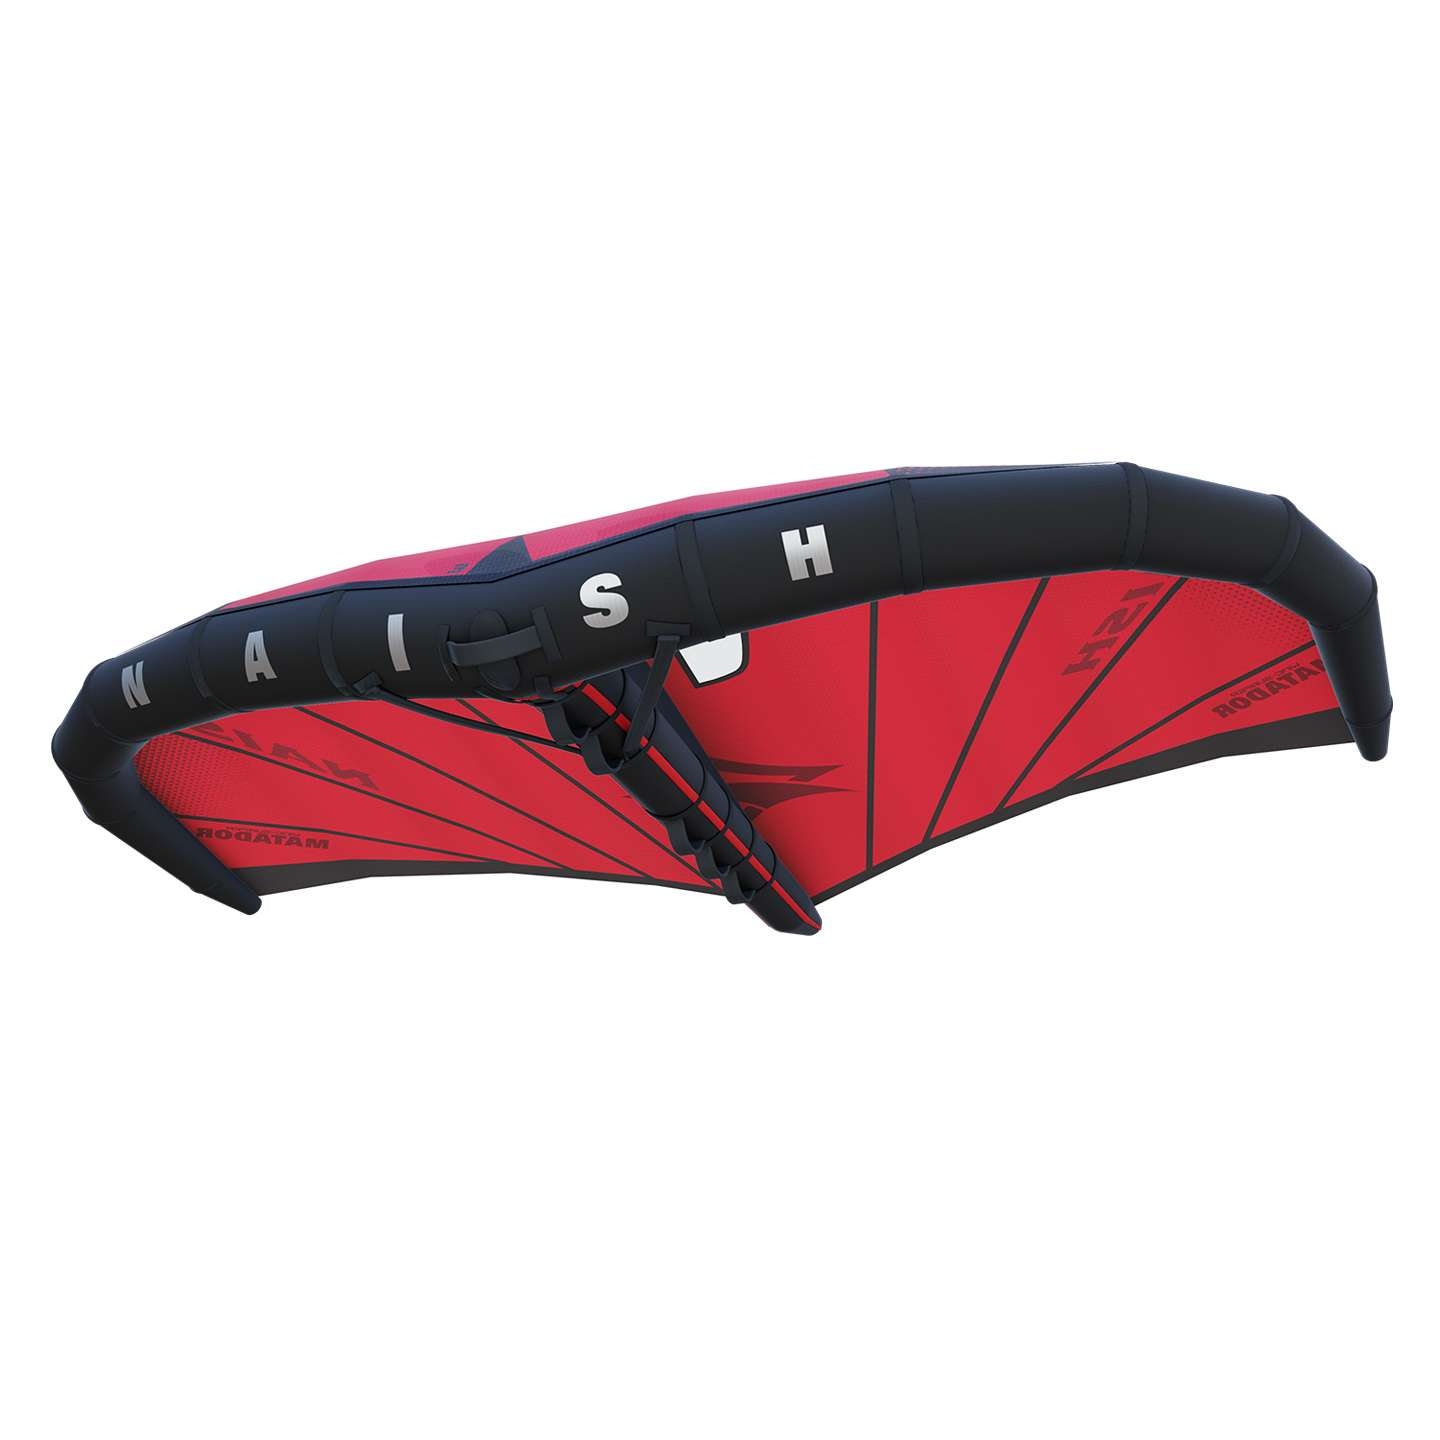 Naish S26 Wing Surfer Matador – 5 Metre – Red – The Foiling Collective